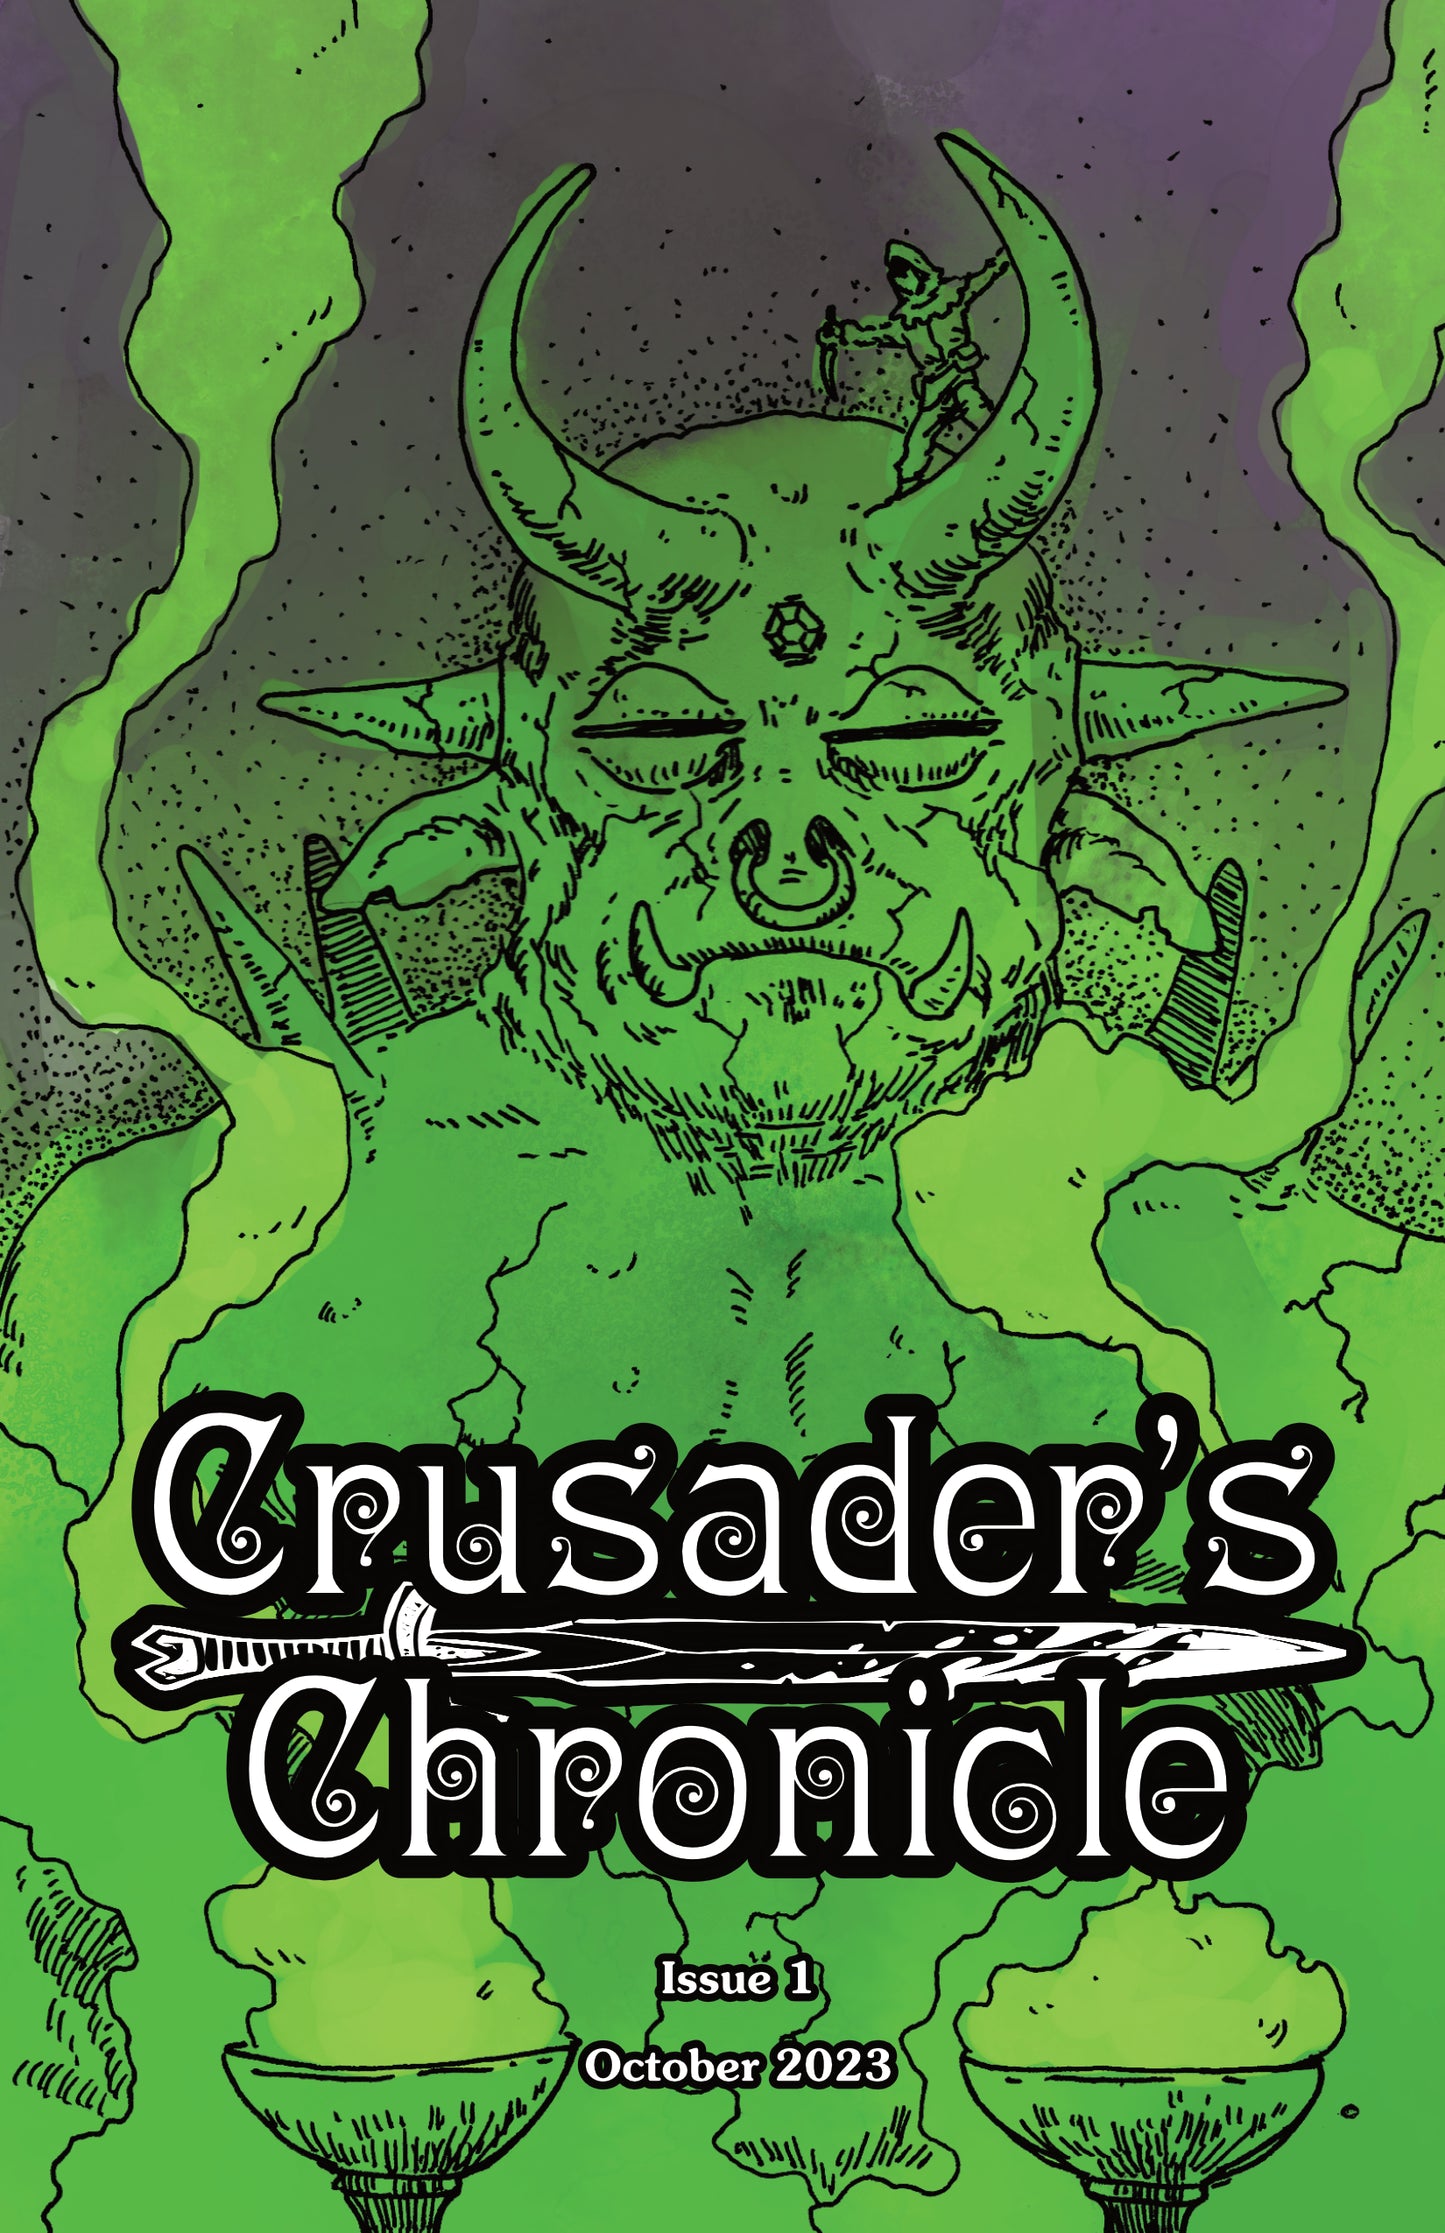 Crusader's Chronicle Issue 1 - October 2023 (PDF)